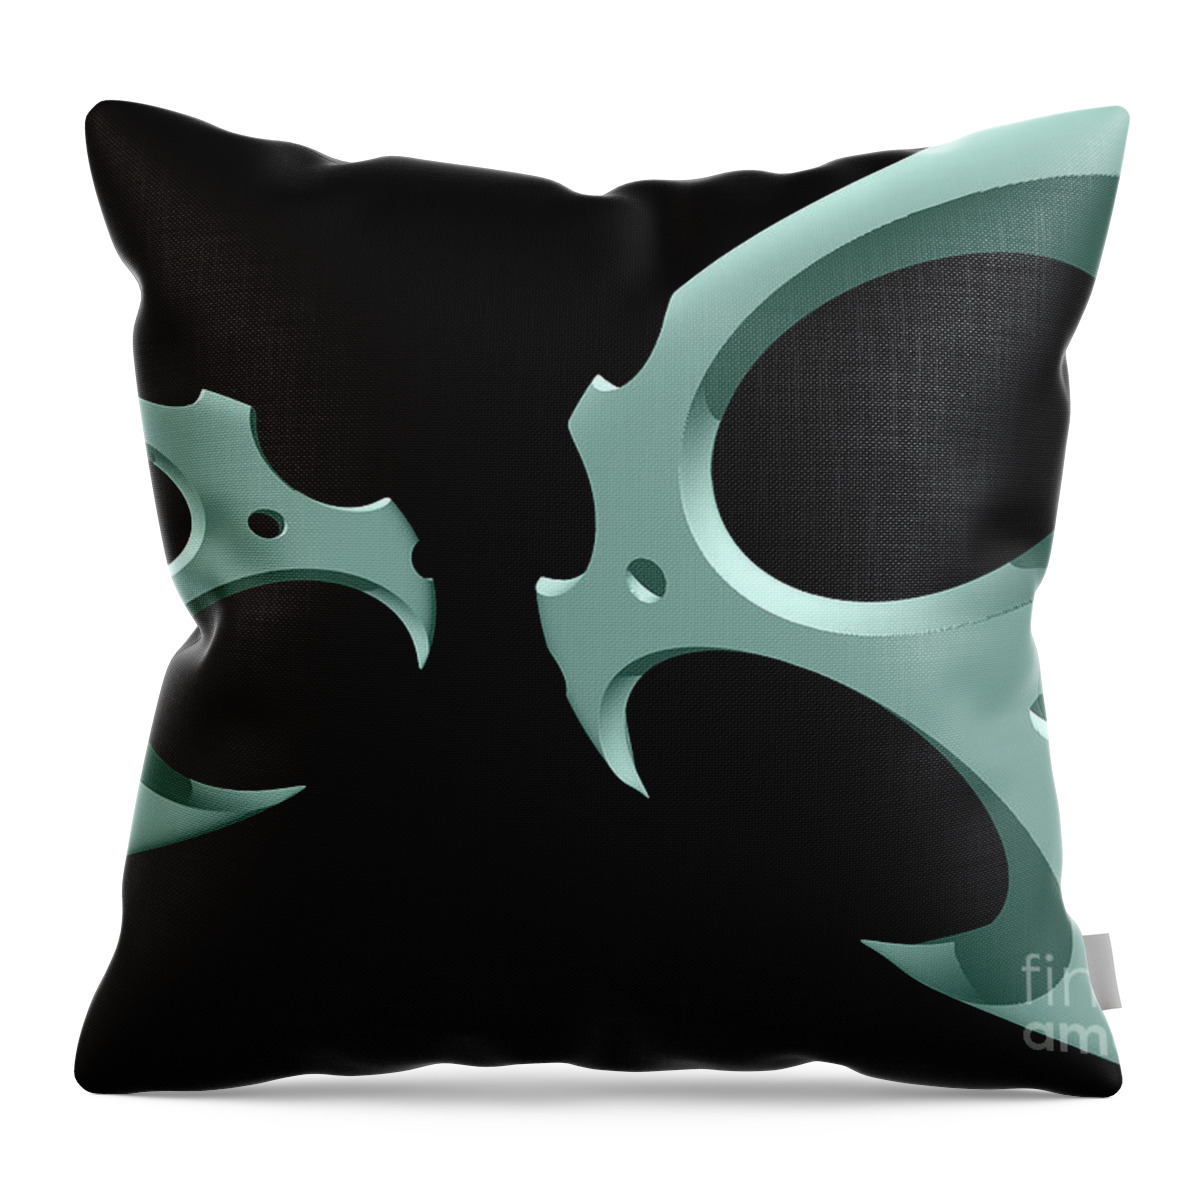 Negative Space Throw Pillow featuring the digital art Negative Space by Phil Perkins